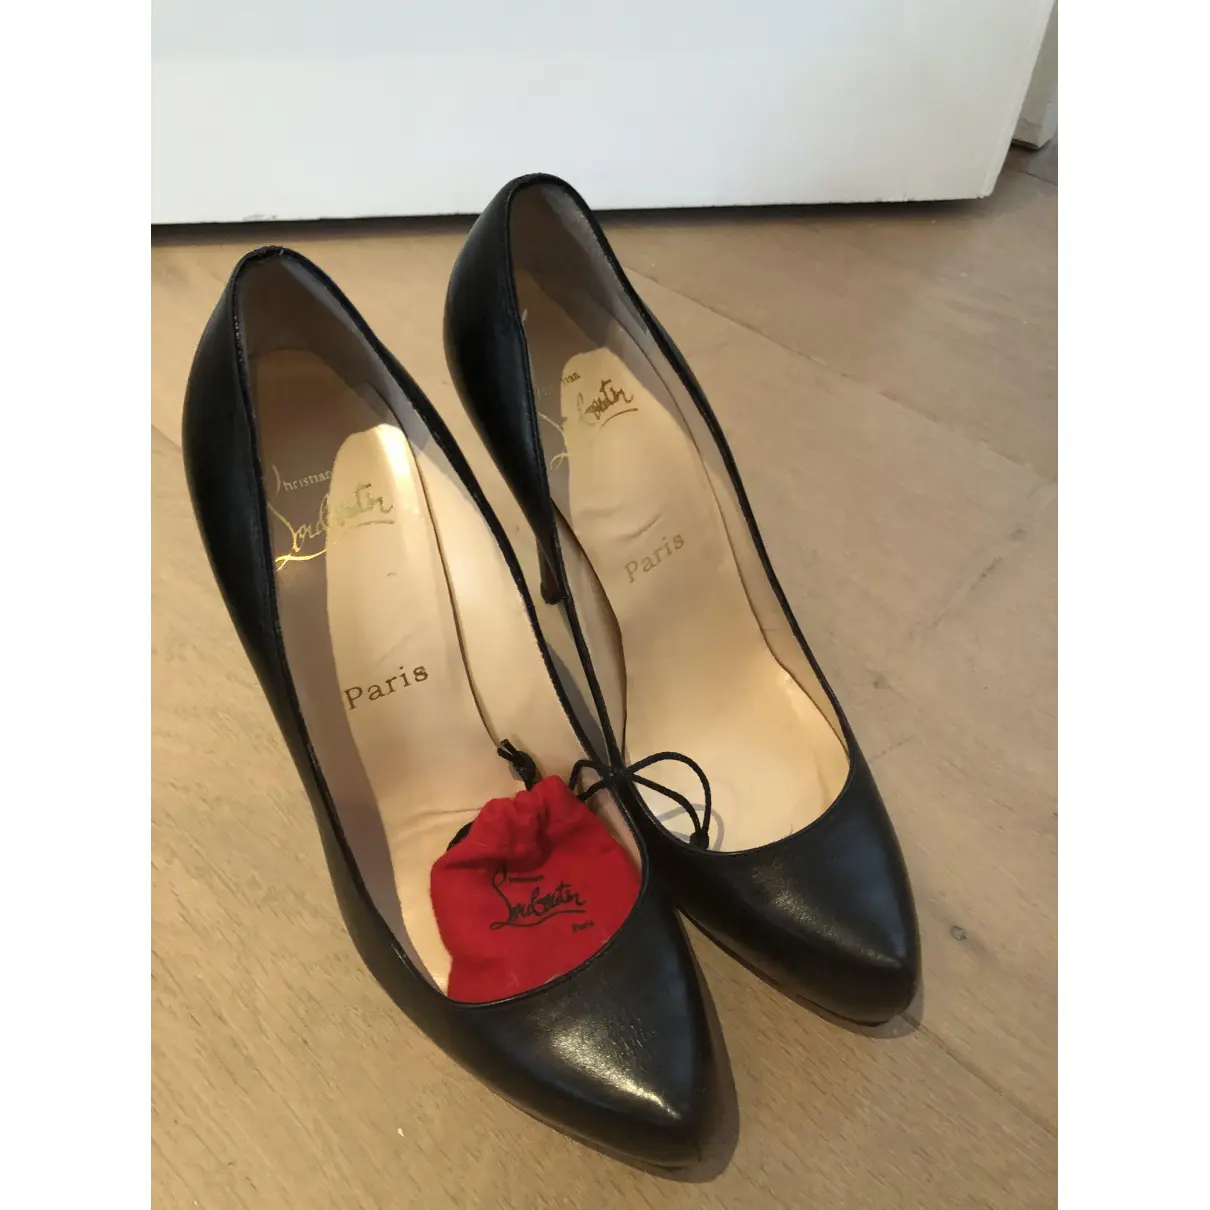 Buy Christian Louboutin Pigalle Plato leather heels online